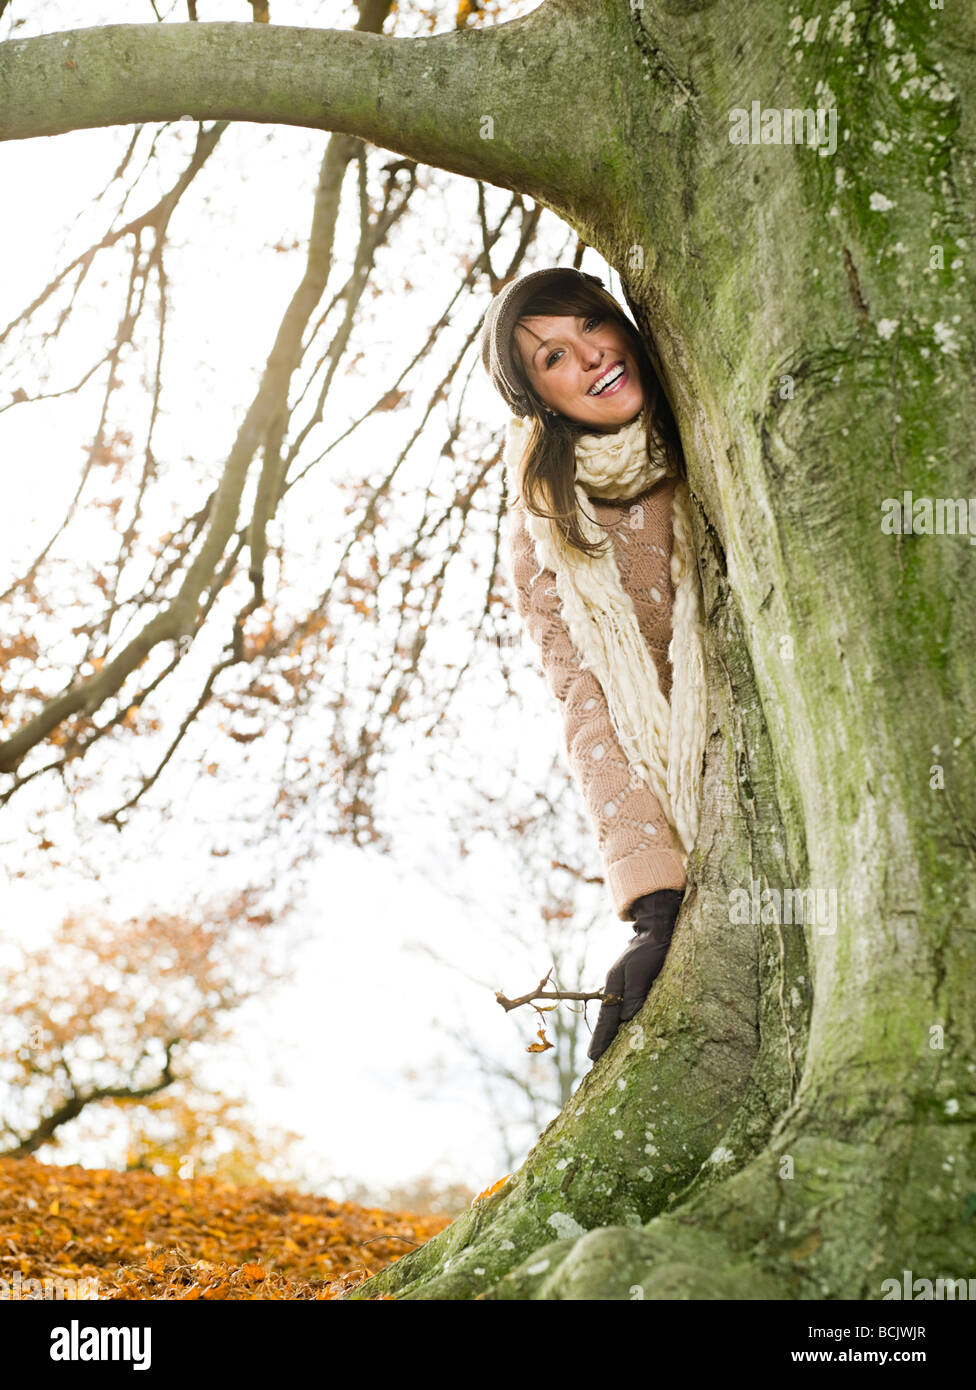 Smiling woman standing behind a tree Stock Photo